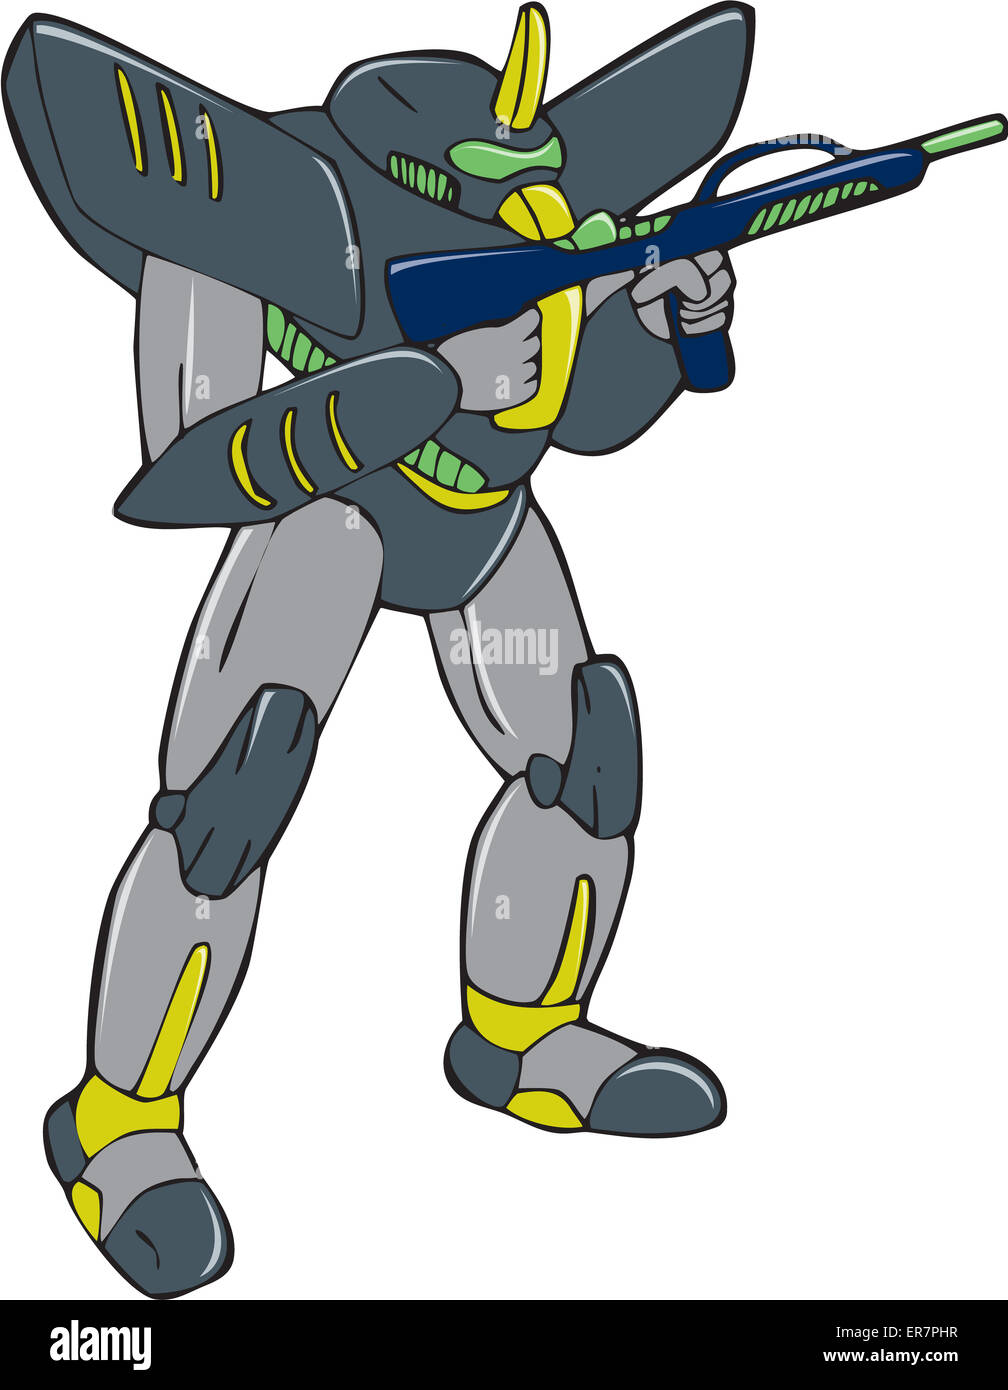 Cartoon style illustration of a mecha robot holding gun viewed from front in an isolated background. Stock Photo